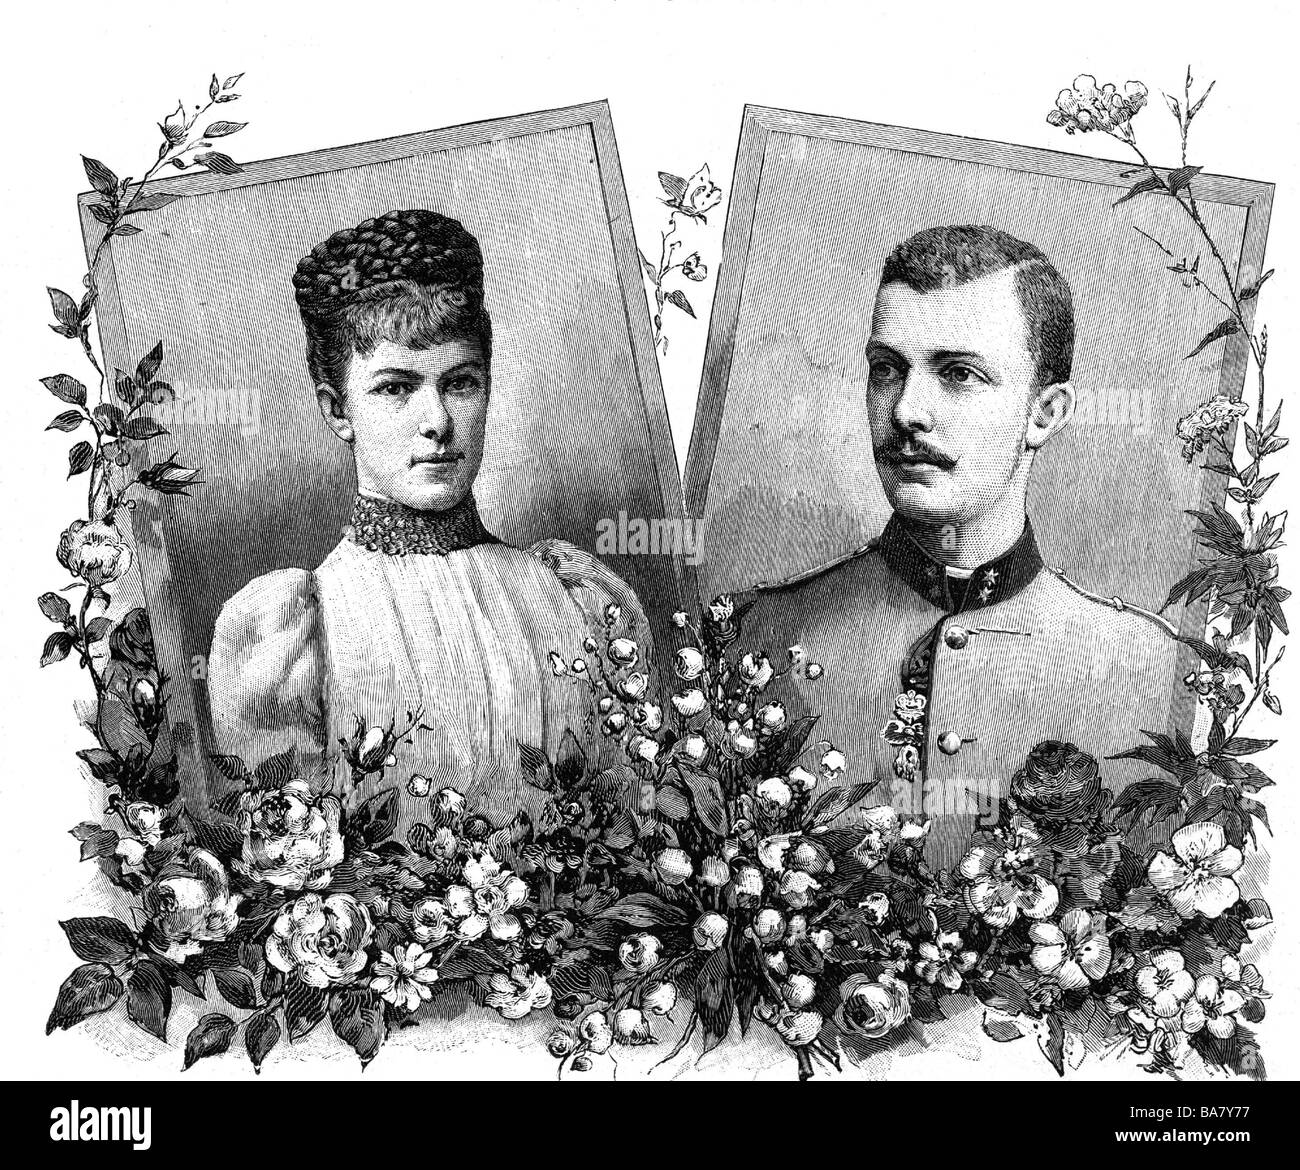 Franz Salvator, 21.8.1866 - 20.4.1939, Archduke of Austria-Tuscany, with wife Archduchess Marie Valerie (22.4.1856 - 6.9.1924), portraits, wood engraving, 1889, , Stock Photo